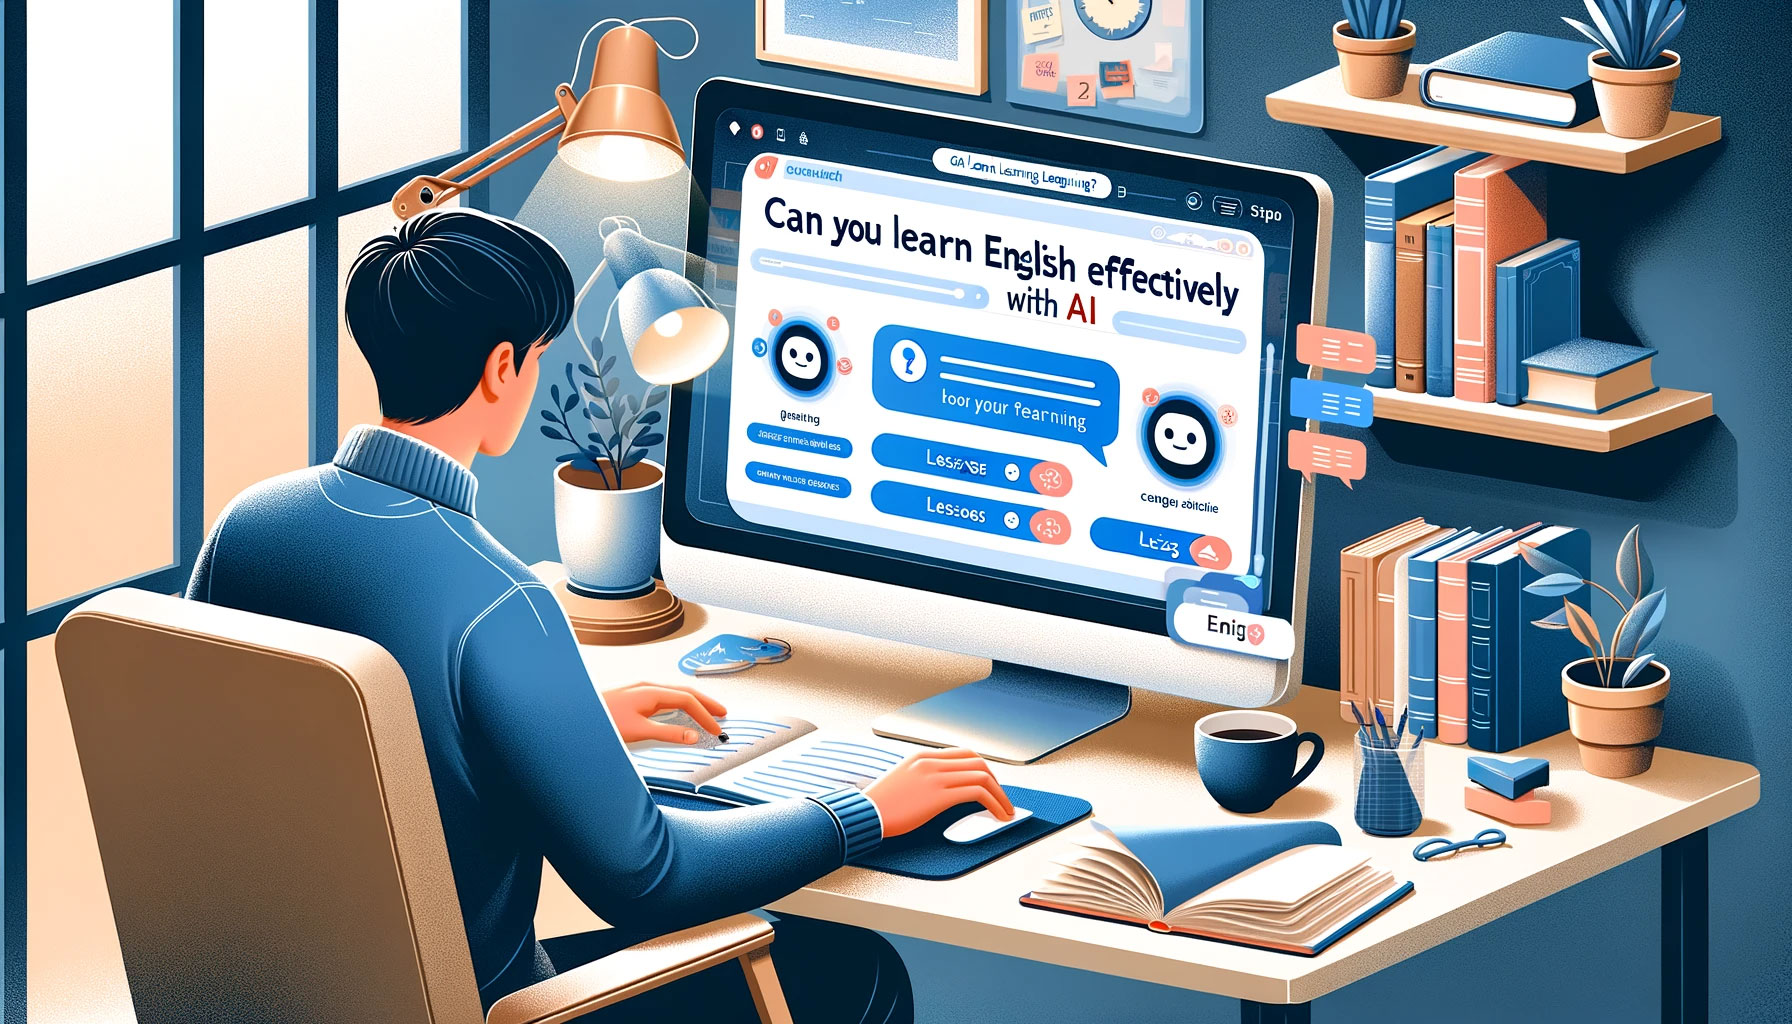 Can You Learn English Effectively with AI